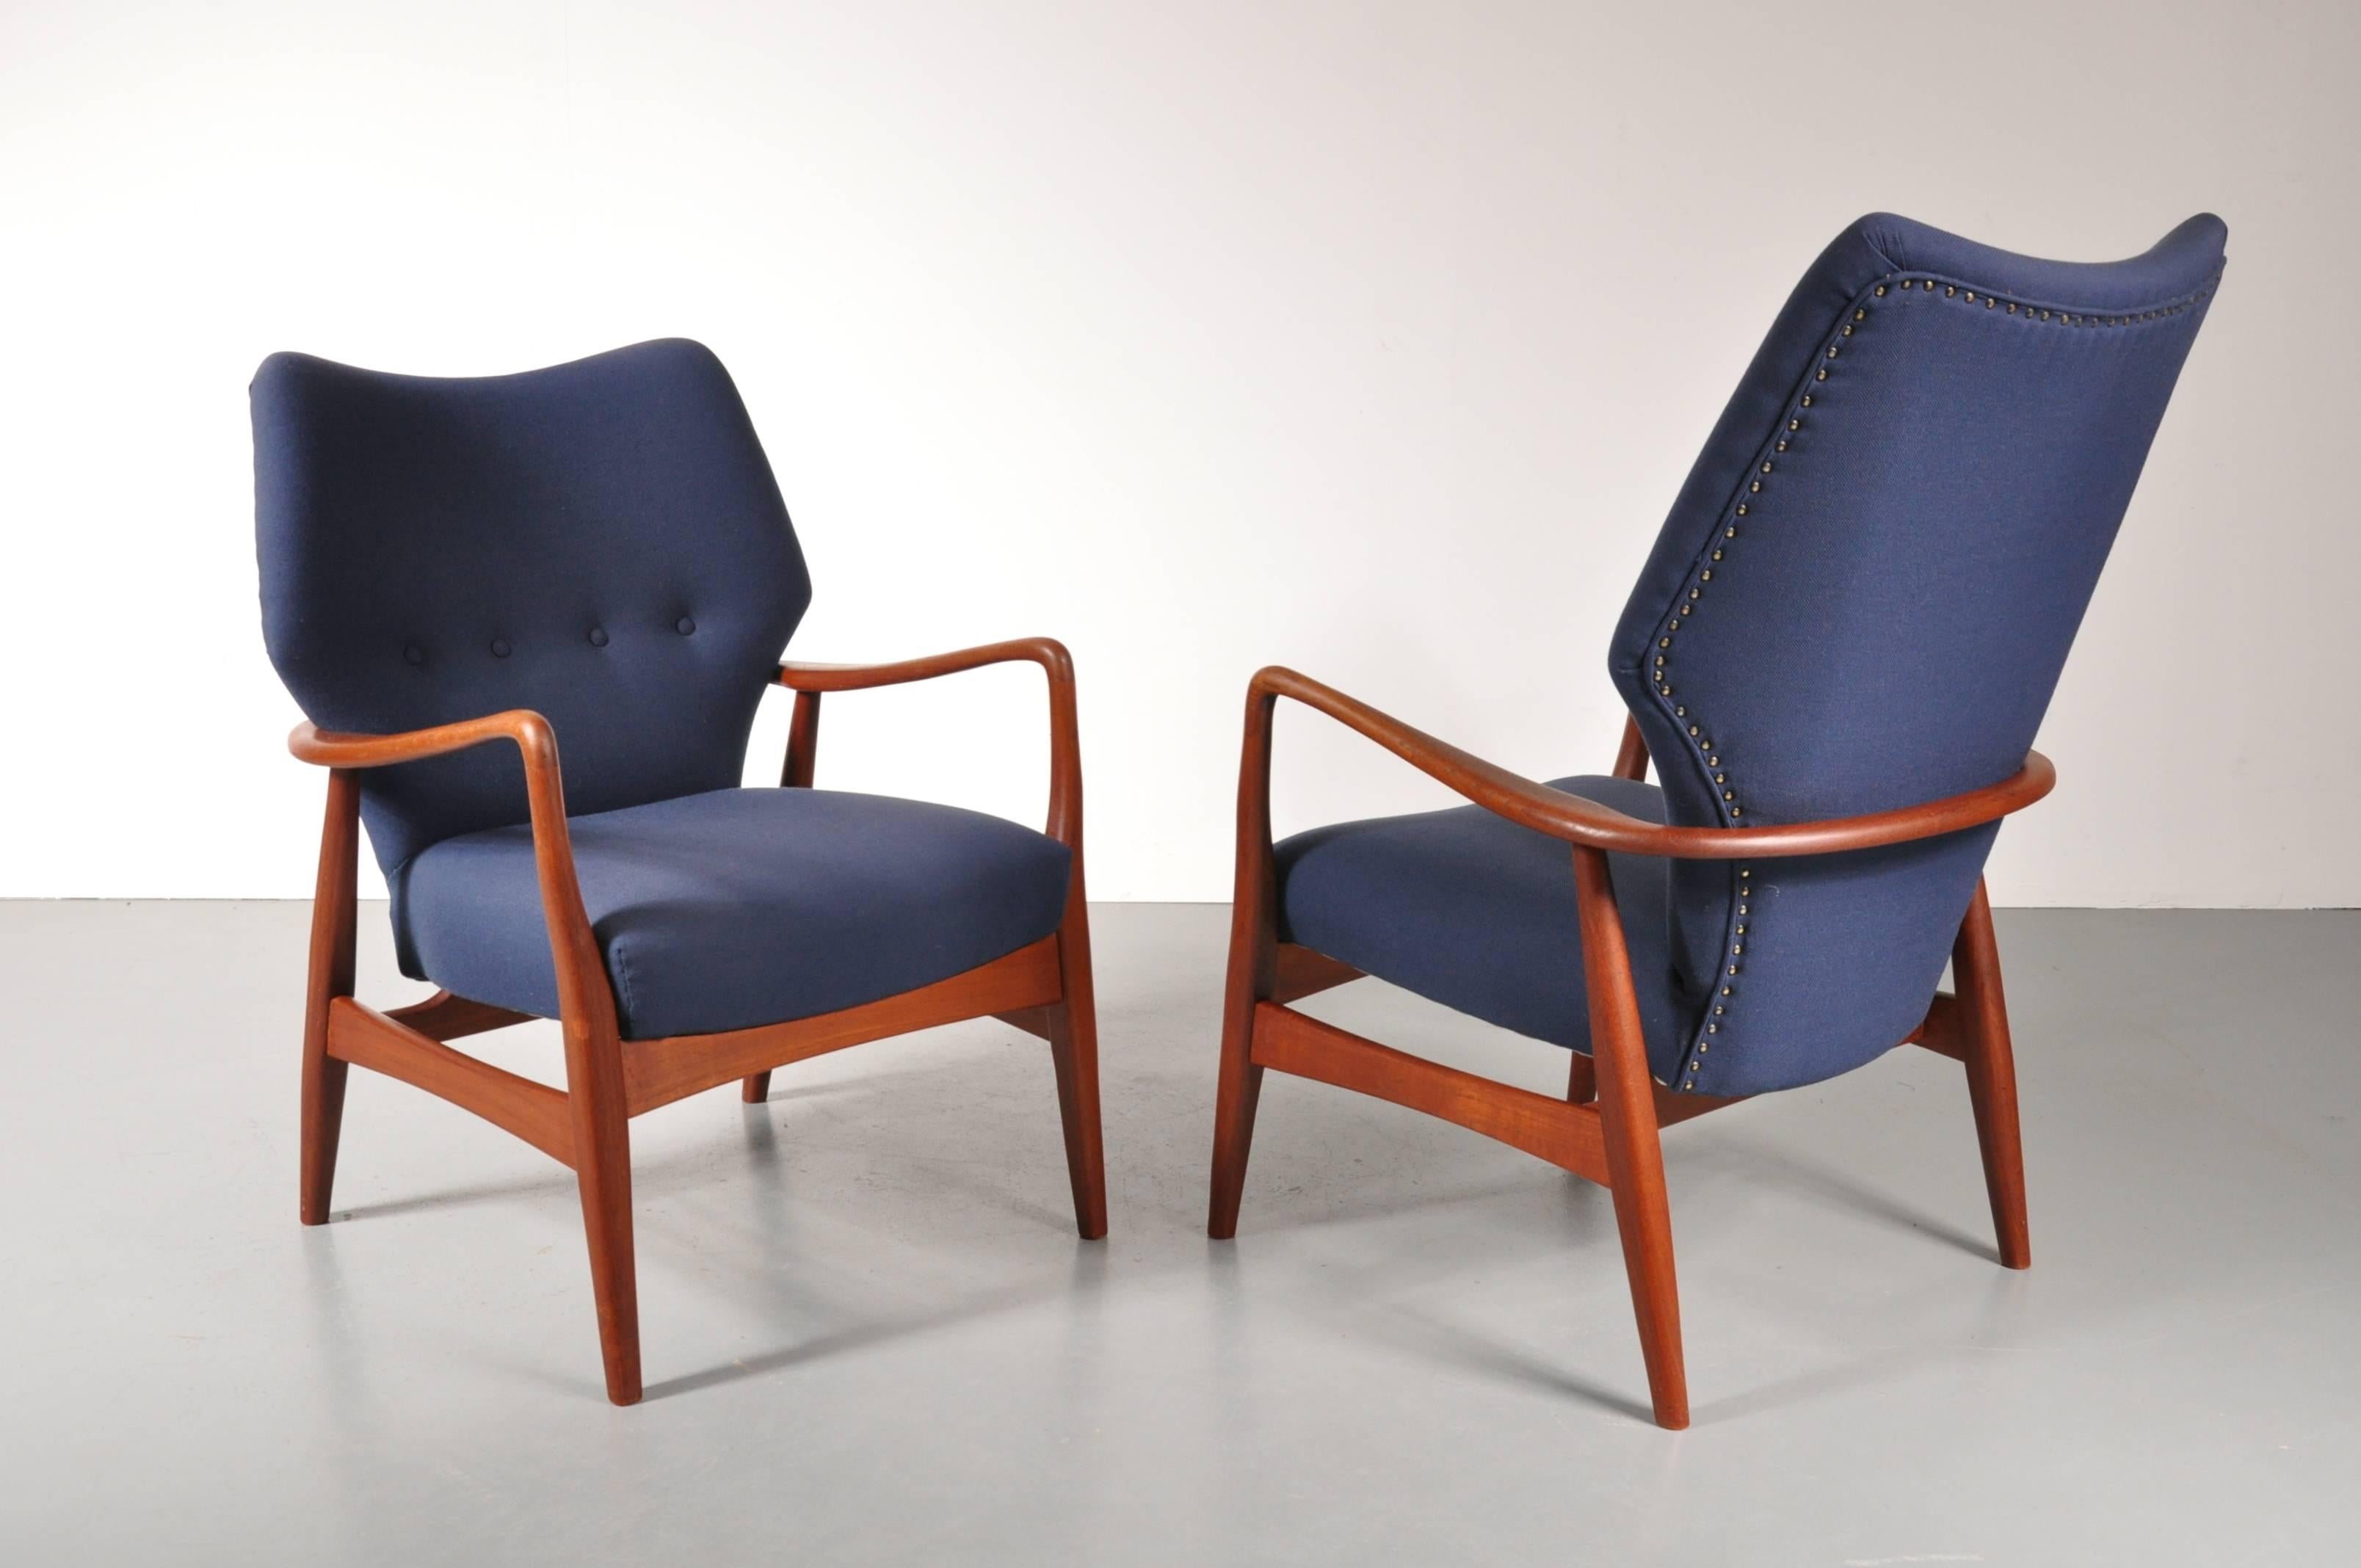 Stunning set of two Bovenkamp easy chairs designed by Aksel Bender Madsen and manufactured by Bovenkamp, circa 1950. 

The set contains one high back (100 cm) and one lowback (89 cm) chair. Both chairs are upholstered in the highest quality deep